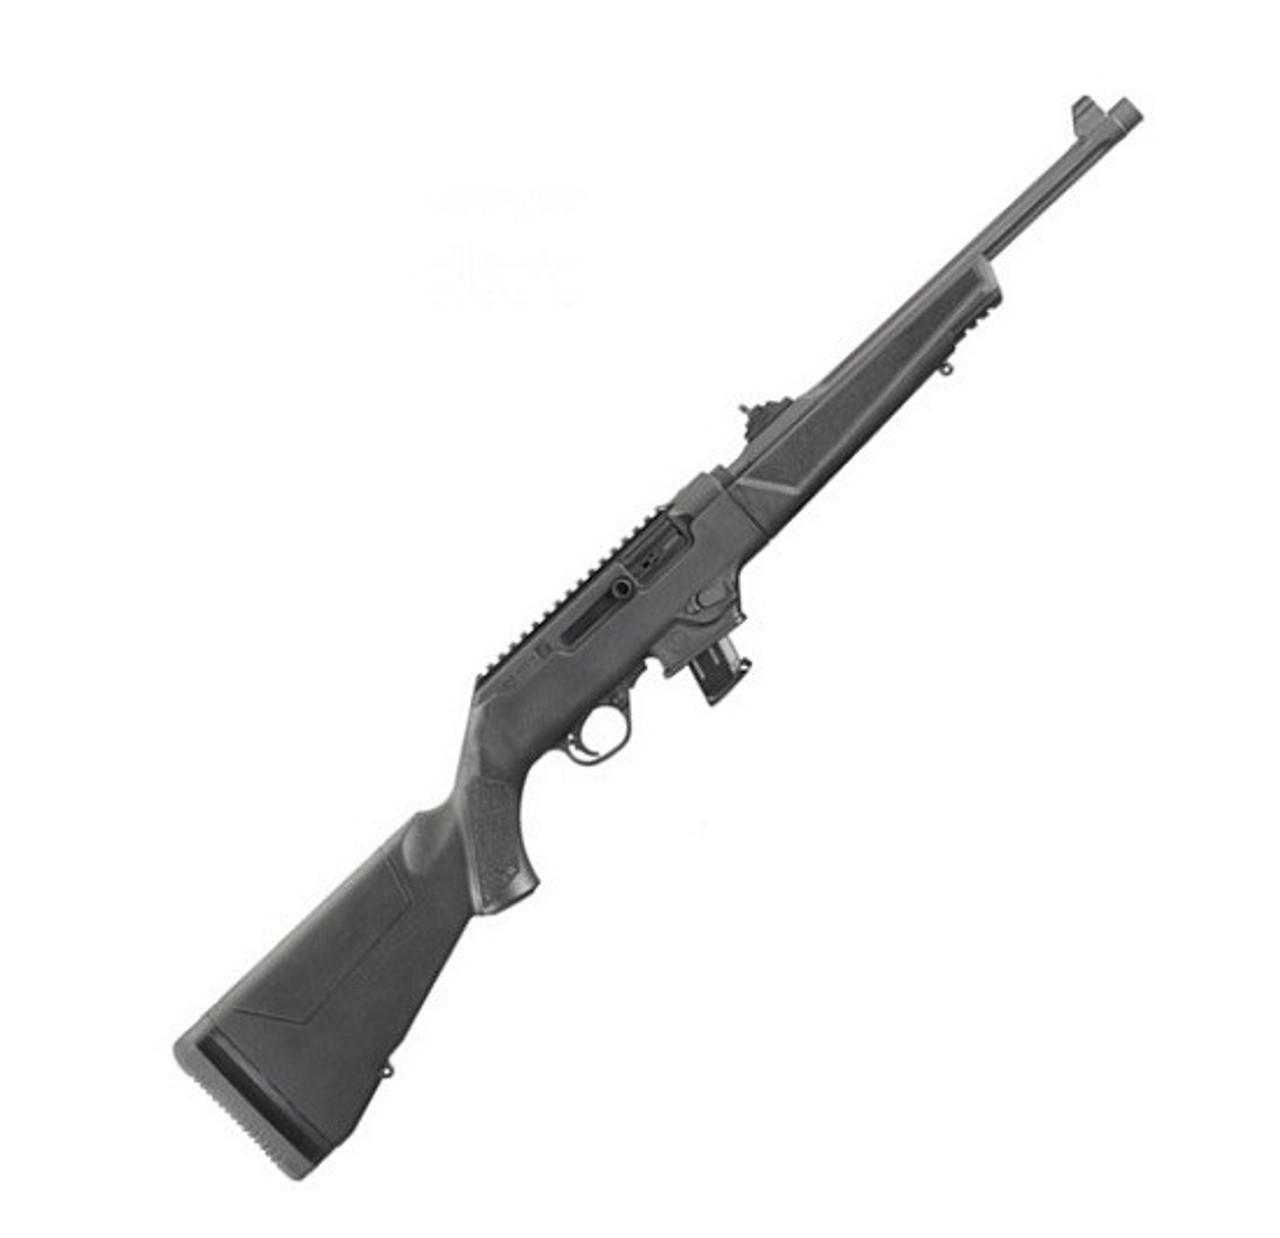 Ruger 9mm PC Carbine Take Down, Non-Restricted, 18.6" Barrel